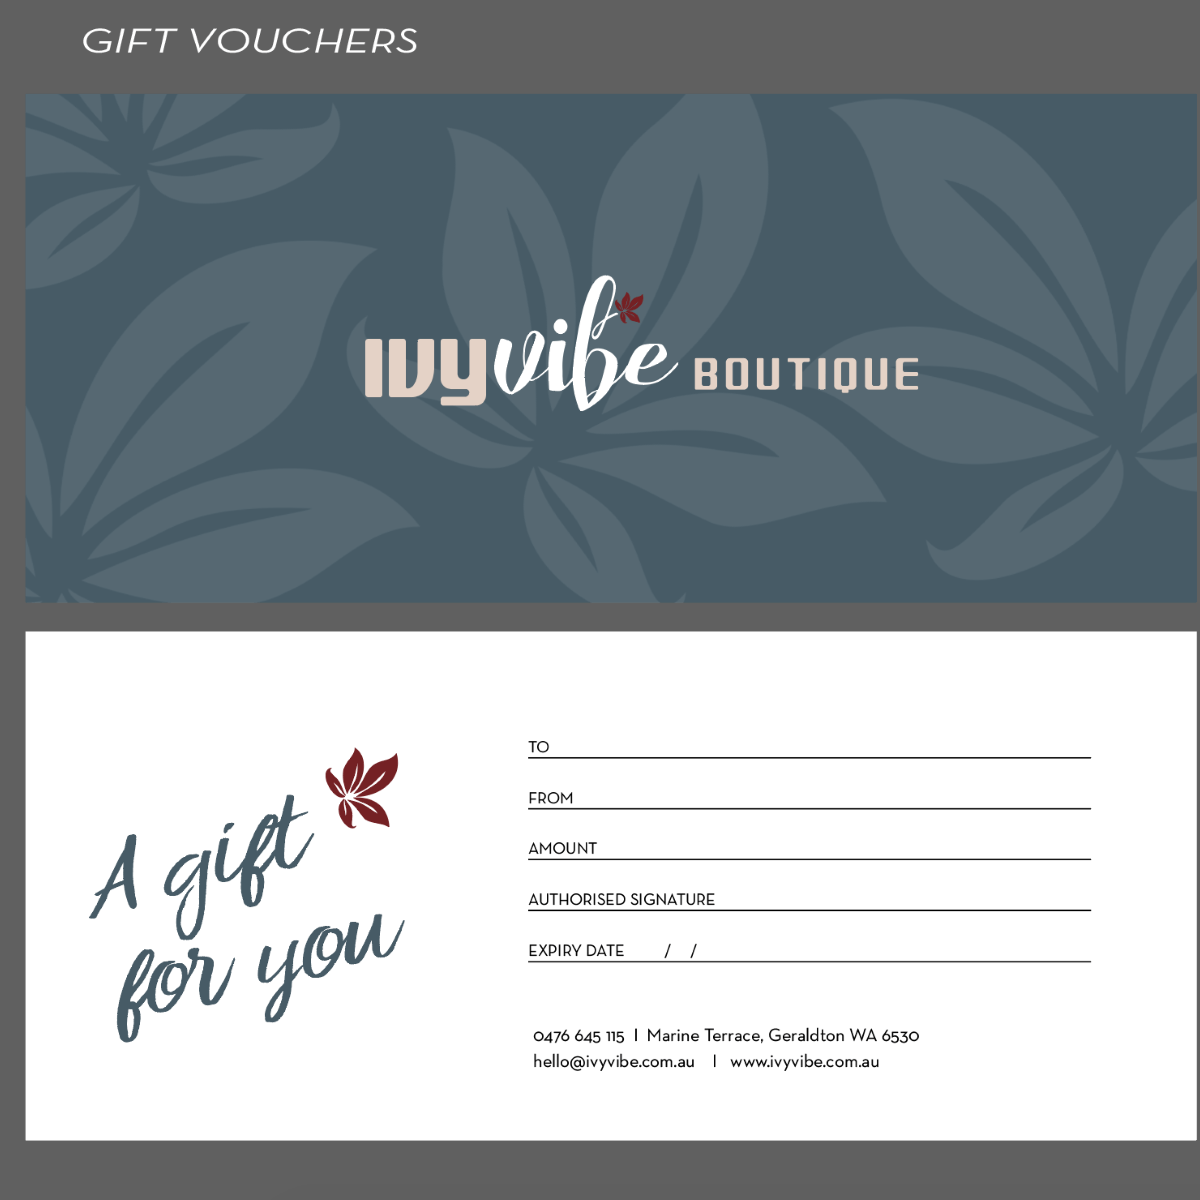 gift card - $75.00 Gift Cards IVY VIBE 